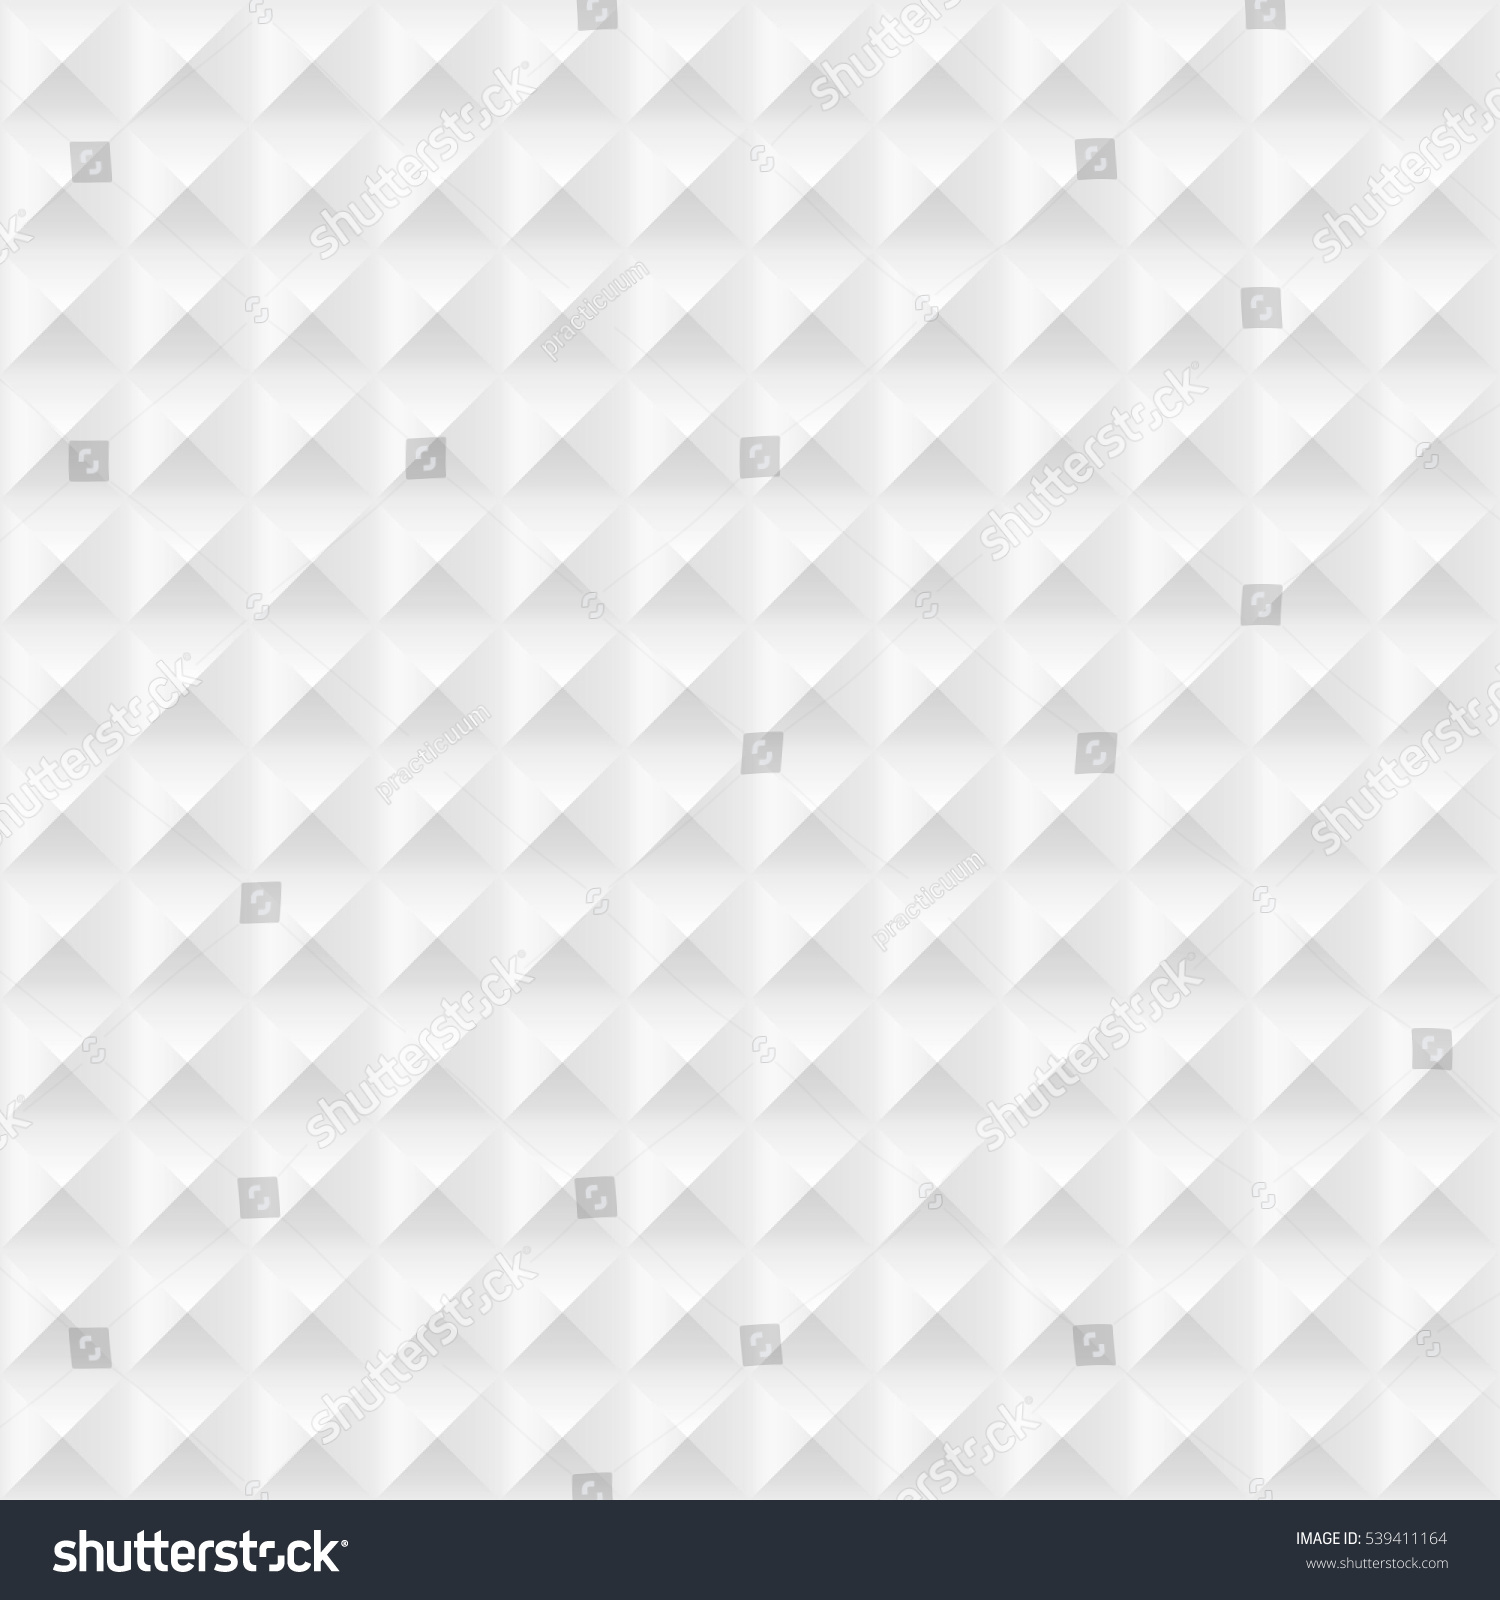 Origami Paper Abstract Vector Background White - 539411164 : Shutterstock